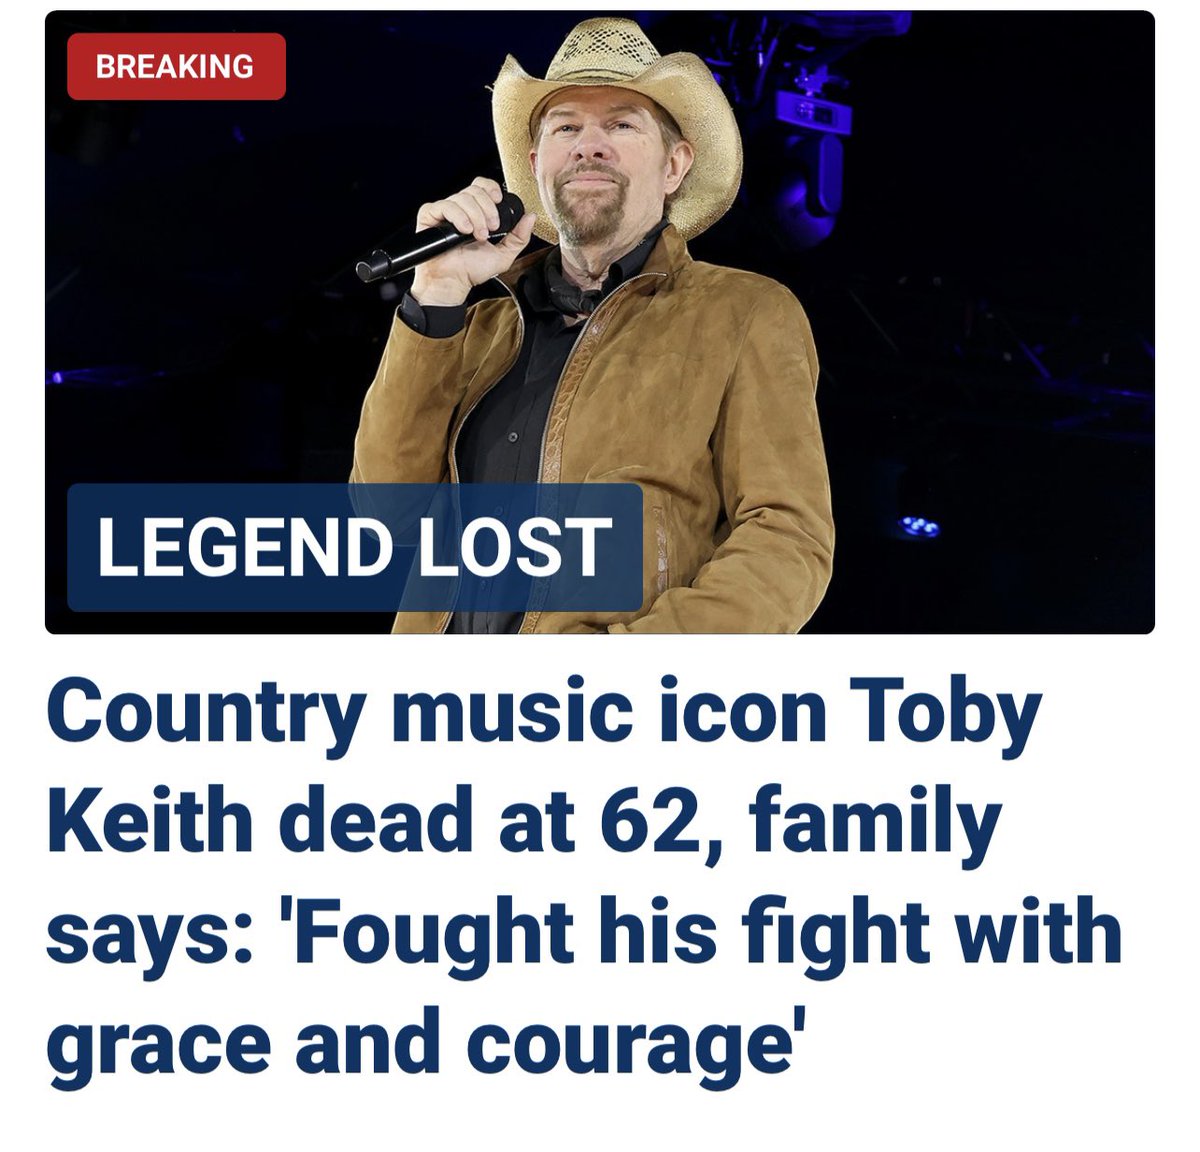 RIP Toby Keith🙏God bless